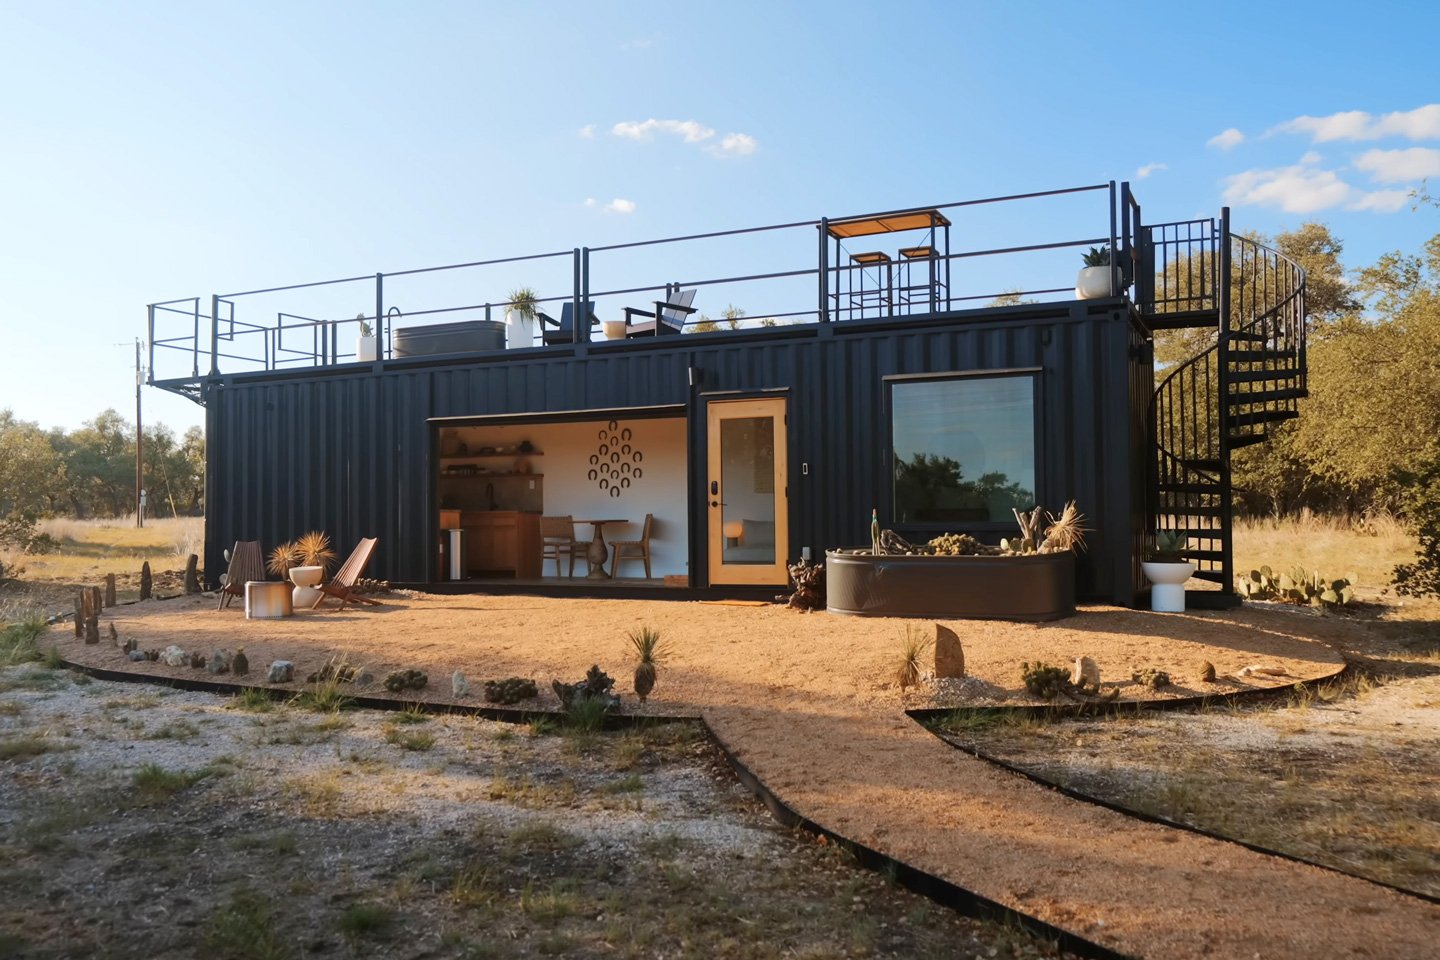 This Airbnb Delivery Container Dwelling in Texas has its personal Rooftop Deck with a scorching tub and hammock